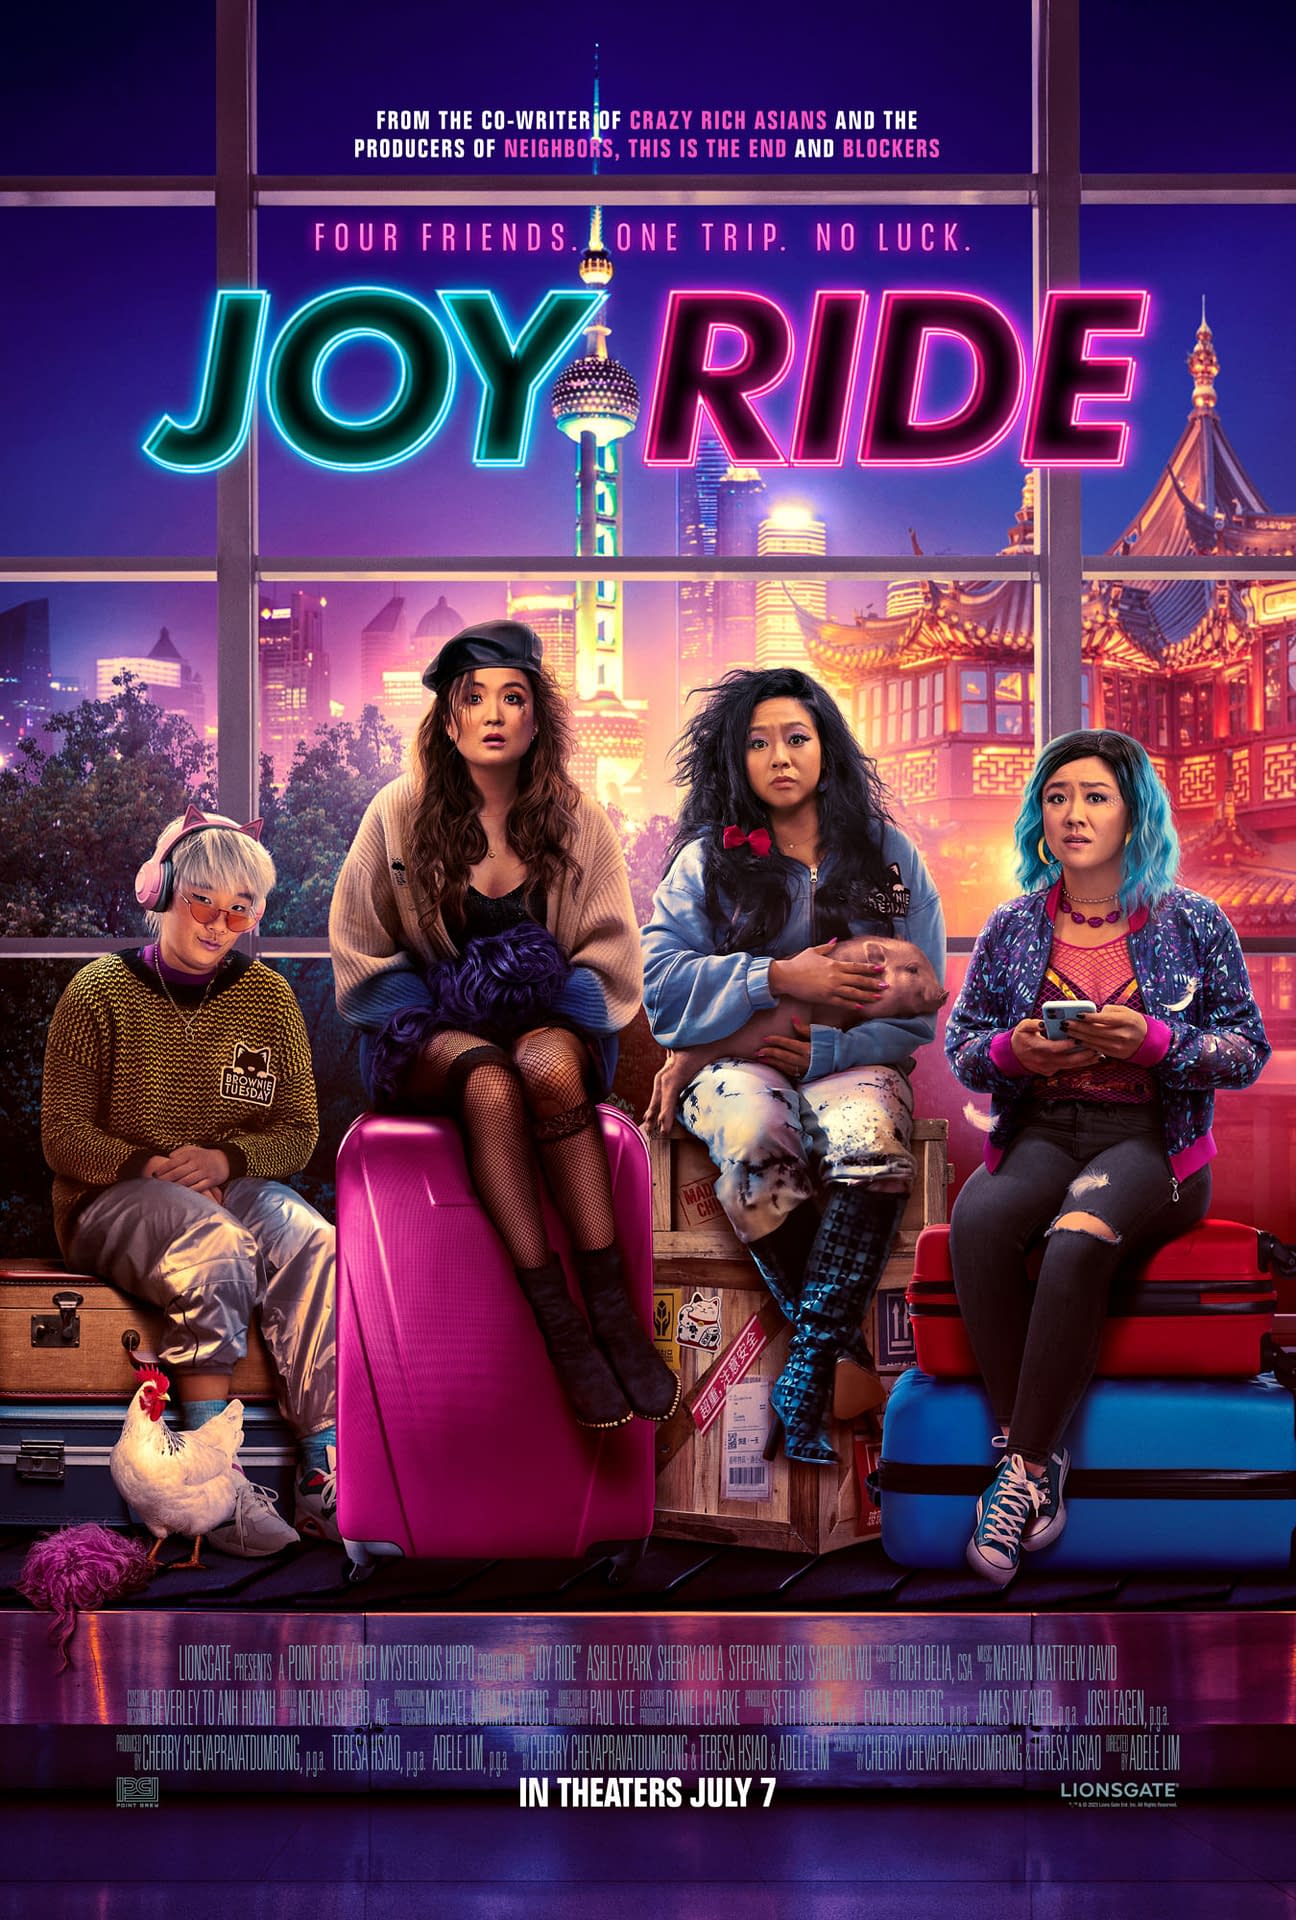 Joy Ride is the Raunchy Asian-American Female Comedy You Need pic